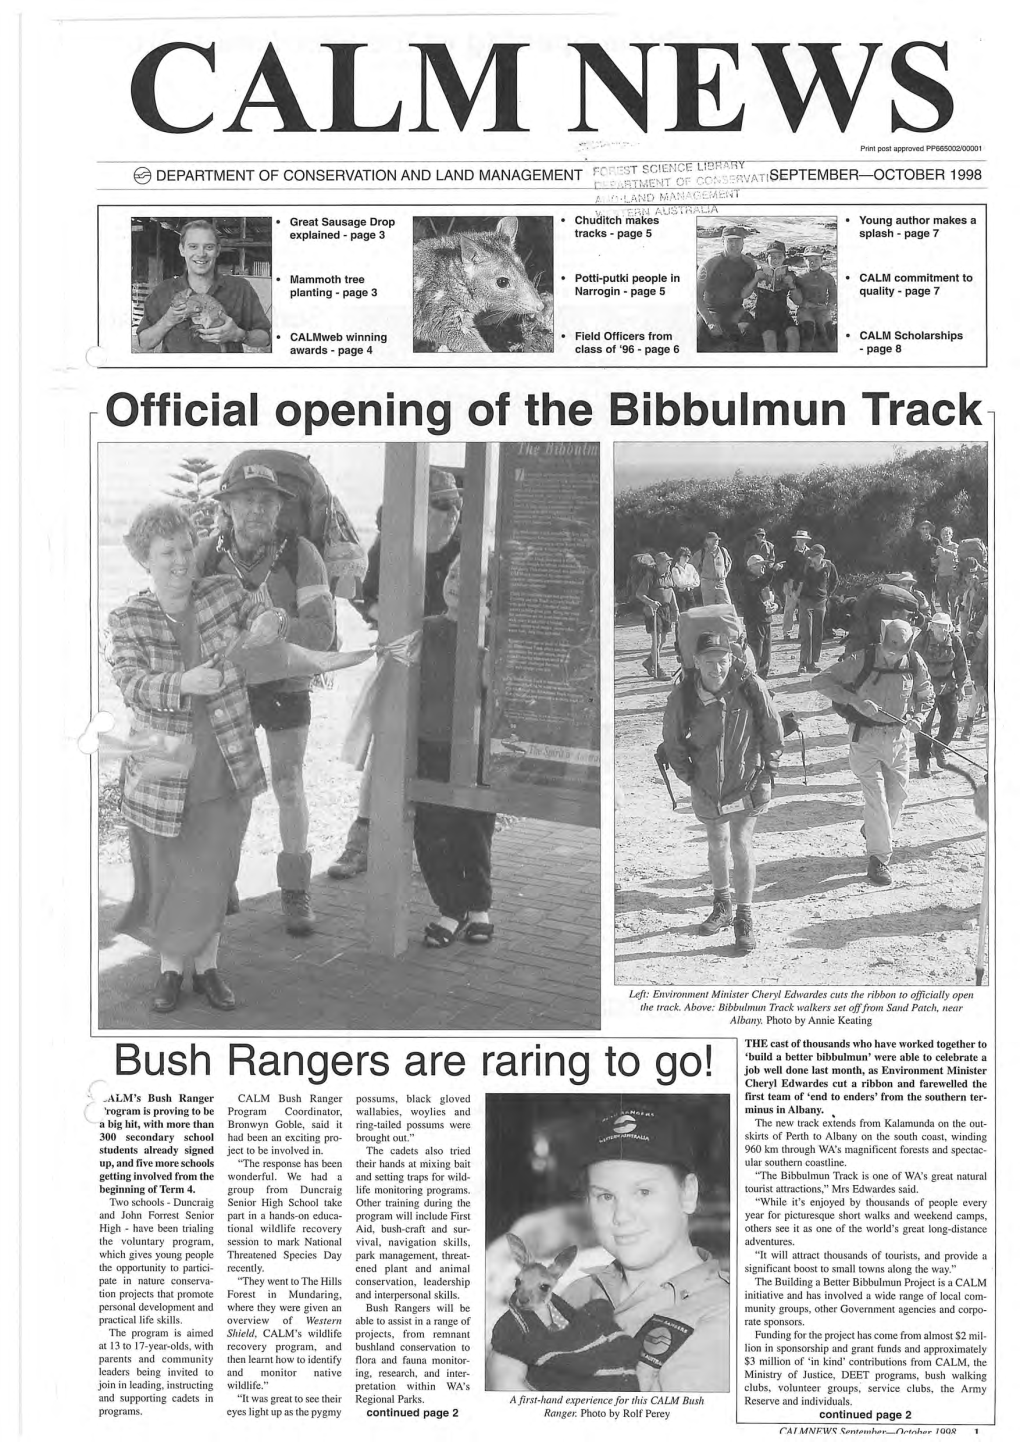 Official Opening of the Bibbulmun Track